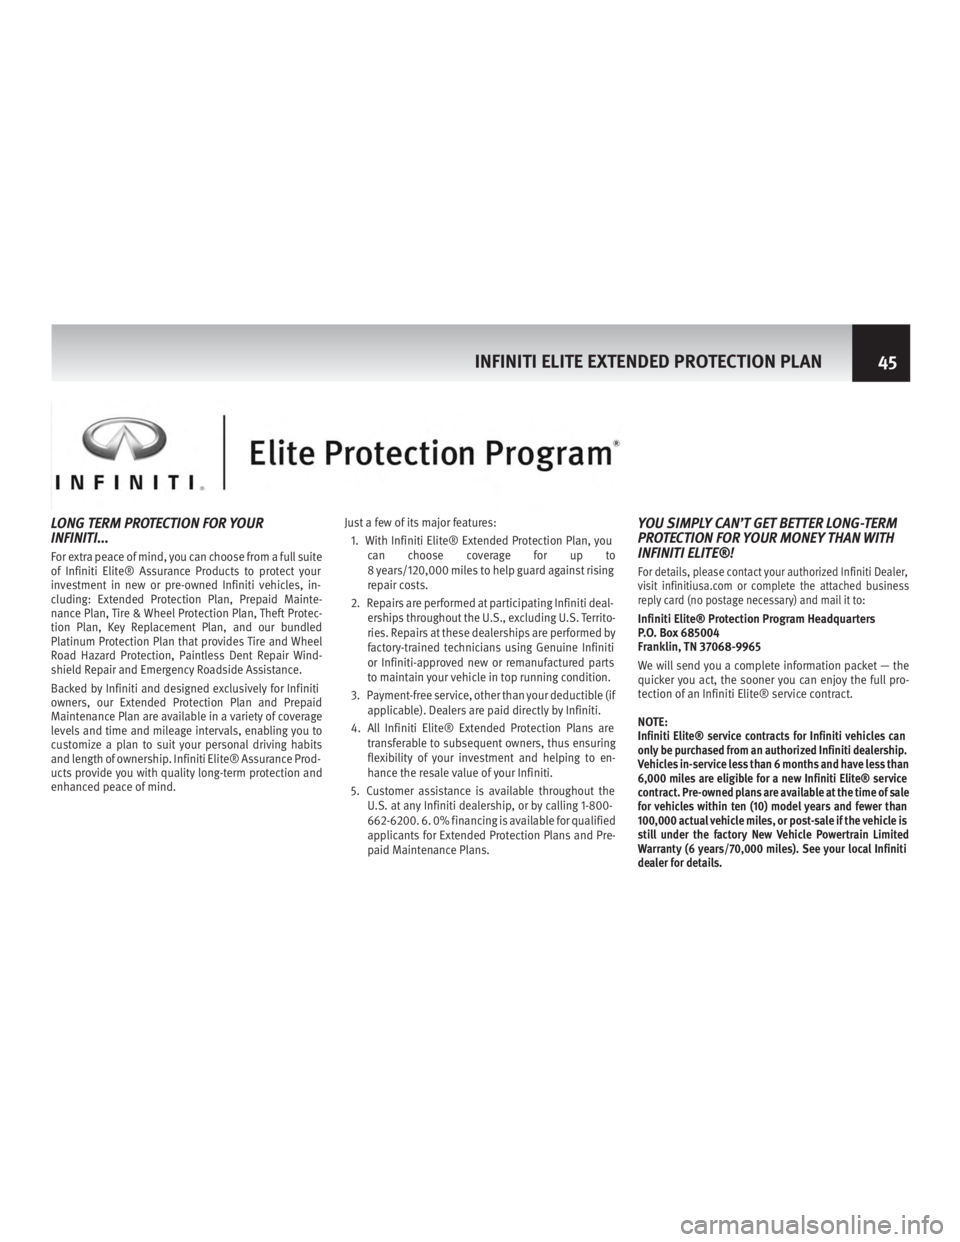 INFINITI QX60 2017  Warranty Information Booklet LONG TERM PROTECTION FOR YOUR
INFINITI...
For extra peace of mind, you can choose from a full suite
of Infiniti Elite® Assurance Products to protect your
investment in new or pre-owned Infiniti vehic